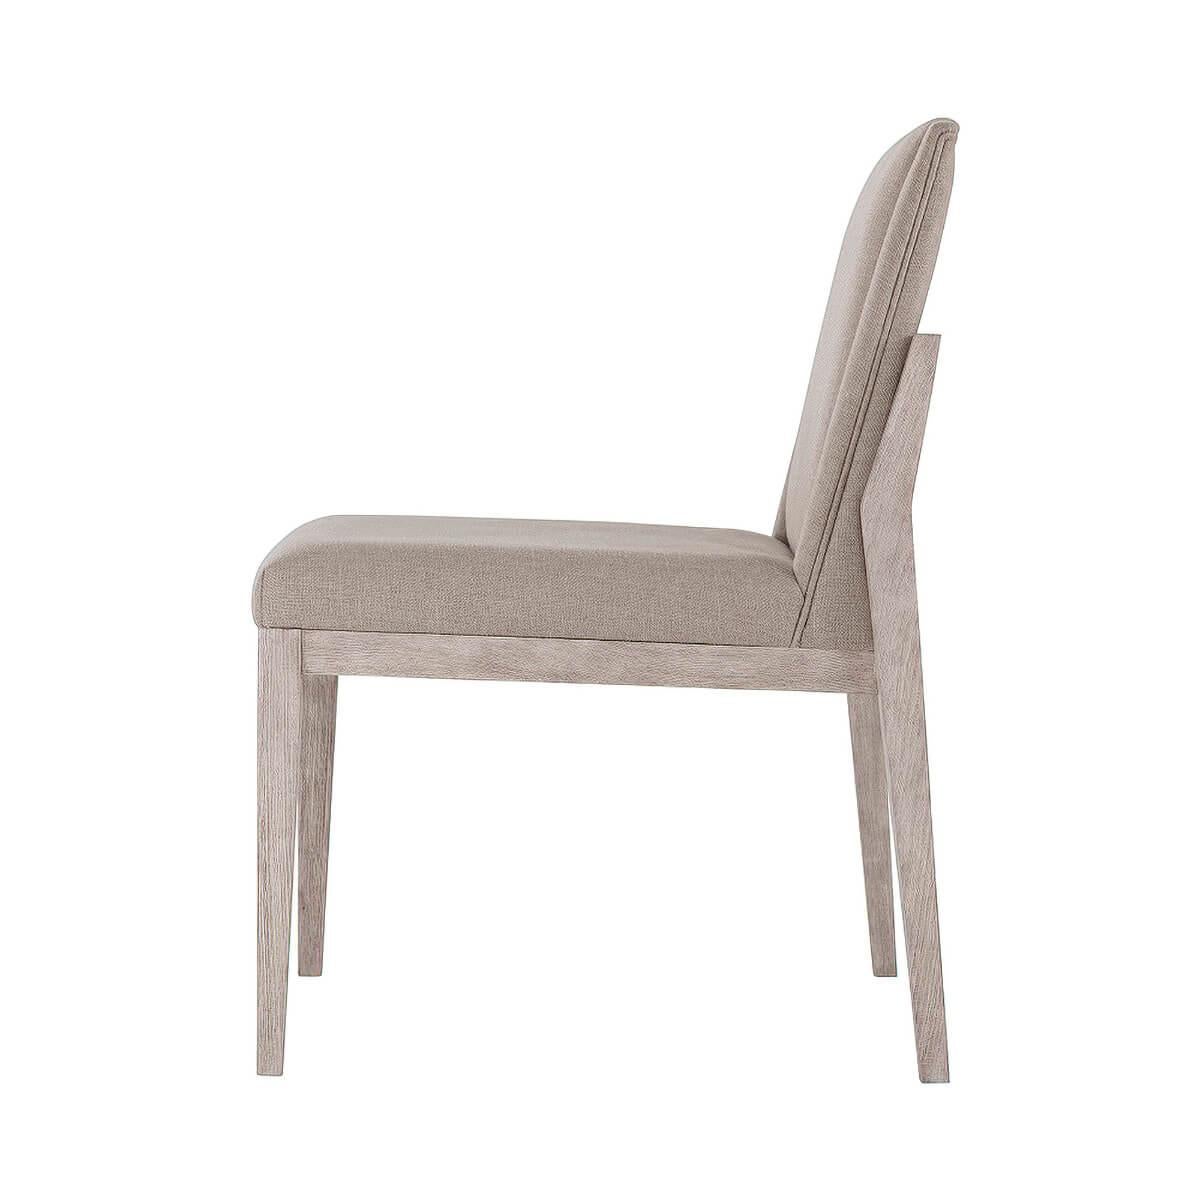 Modern upholstered dining side chair, the brushed beech wood finished in our gowan finish, with an upholstered backrest and bowed seat. Raised on square tapered and out flaring legs. Upholstery is a stain-resistant performance fabric.

Draper